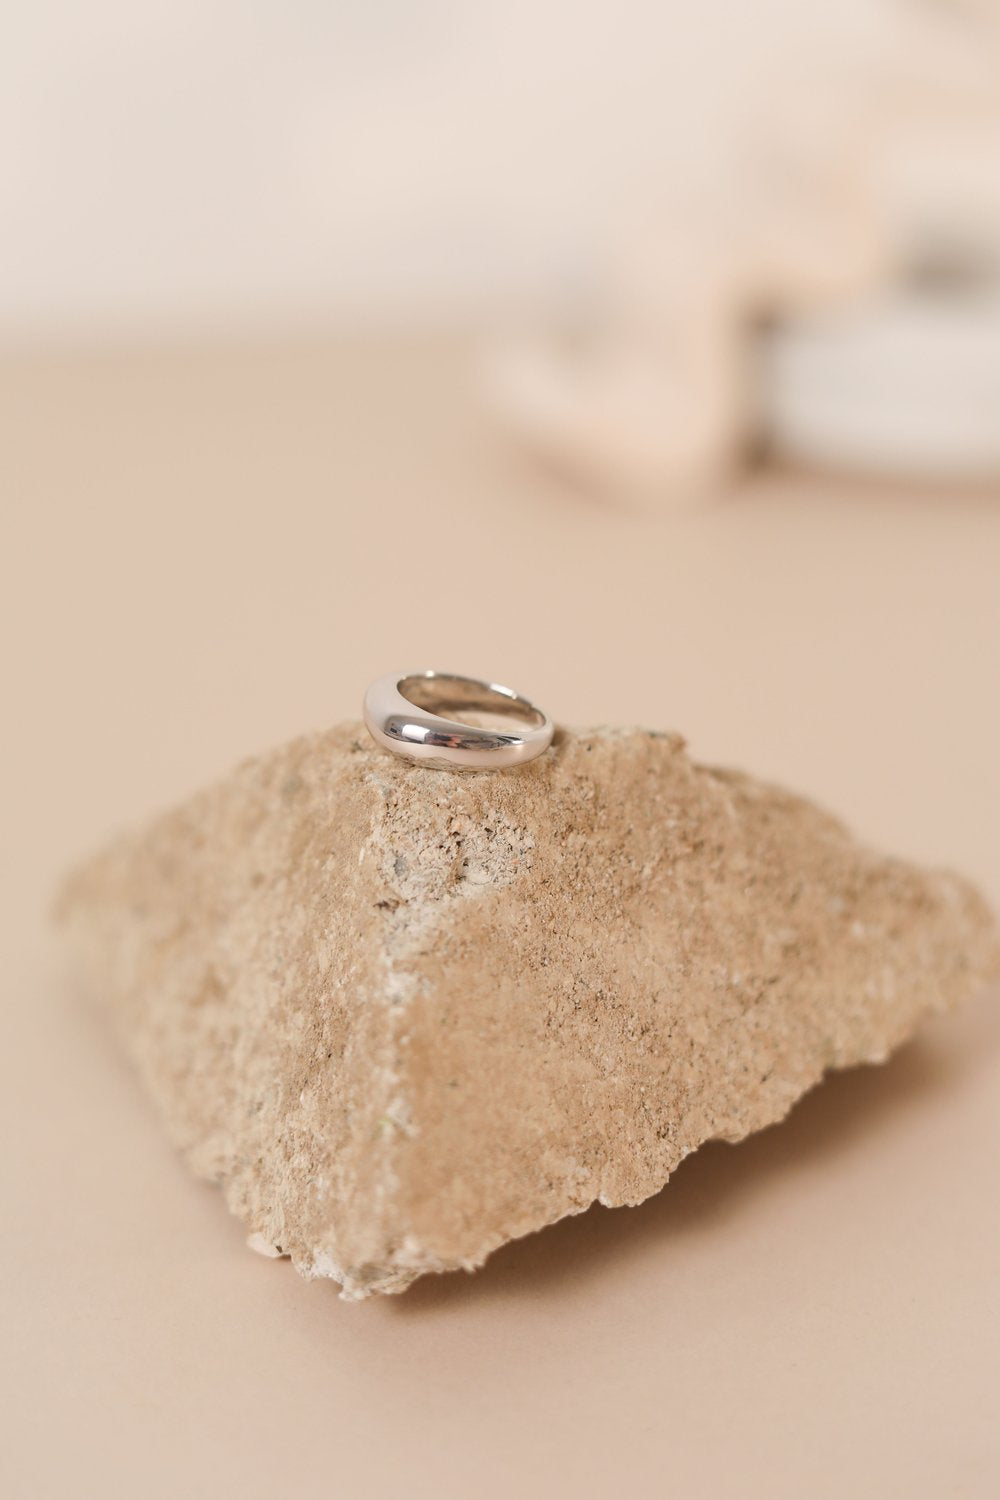 The Every Space Della Dome Ring in sterling silver by Roake Studio